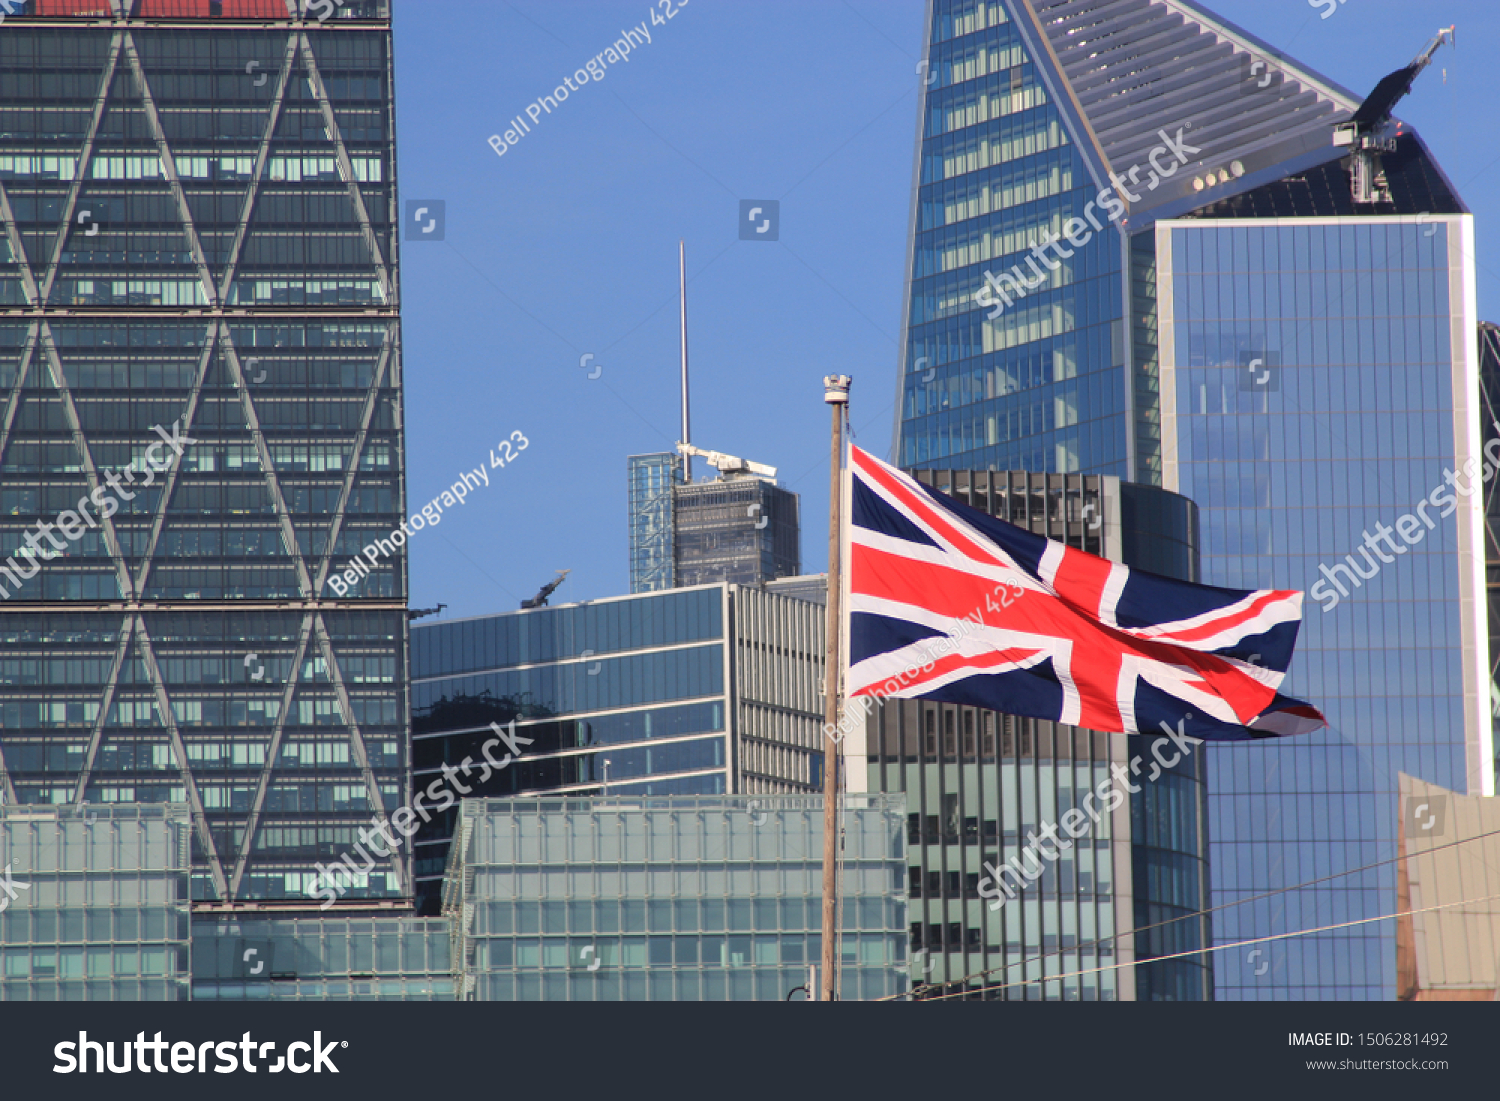 Union Jack flag flying in front of the modern buildings of the City of London designating Brexit and the London financial centre #1506281492